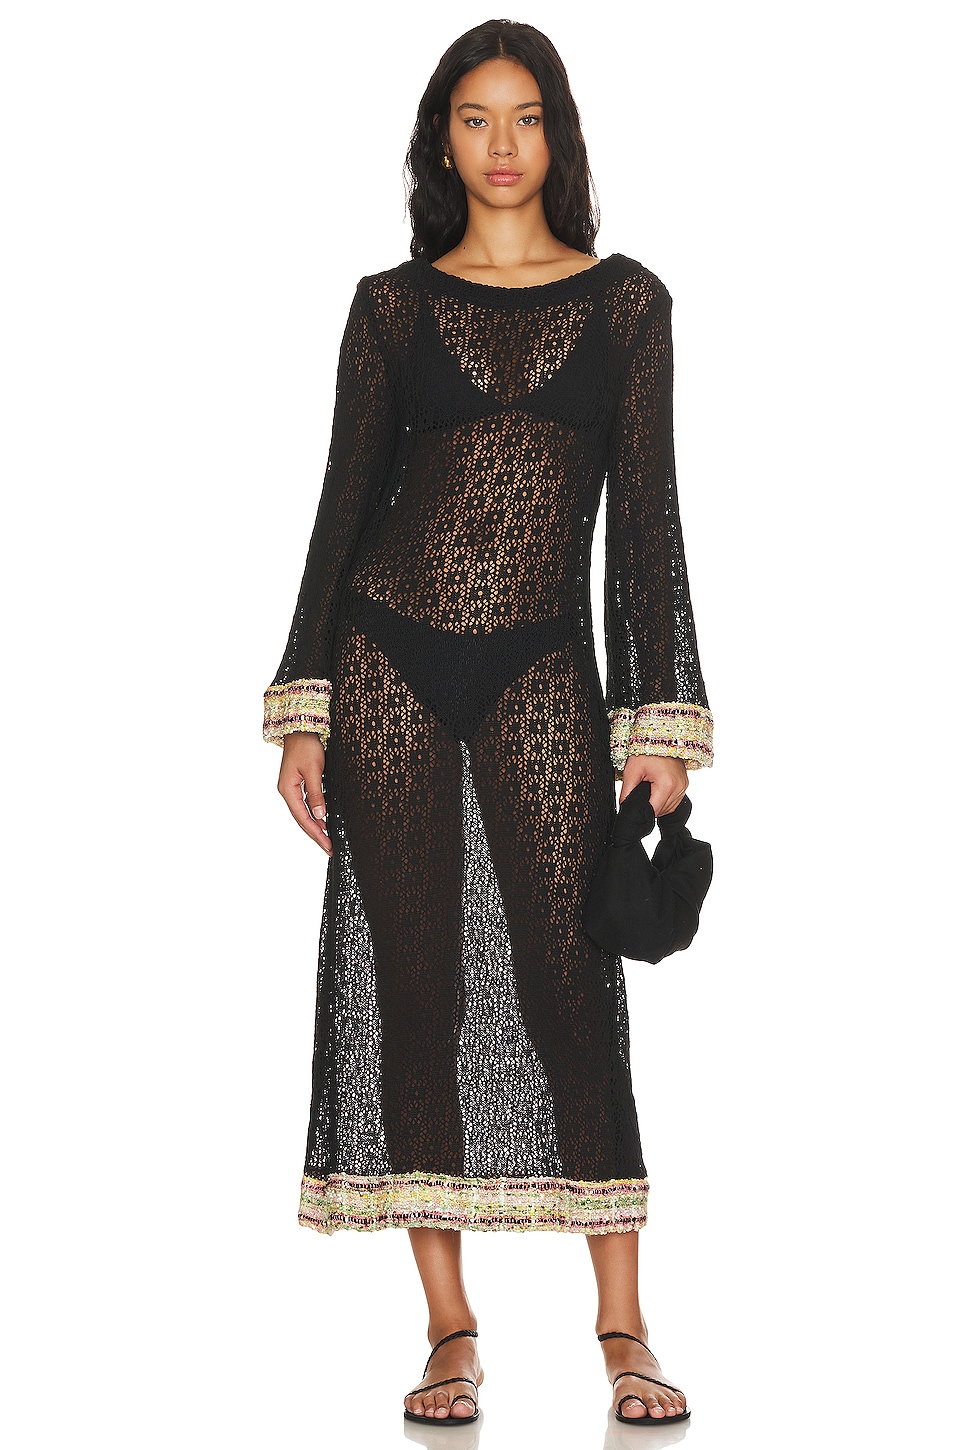 Black lace dress with wide sleeves - Lily Was Here